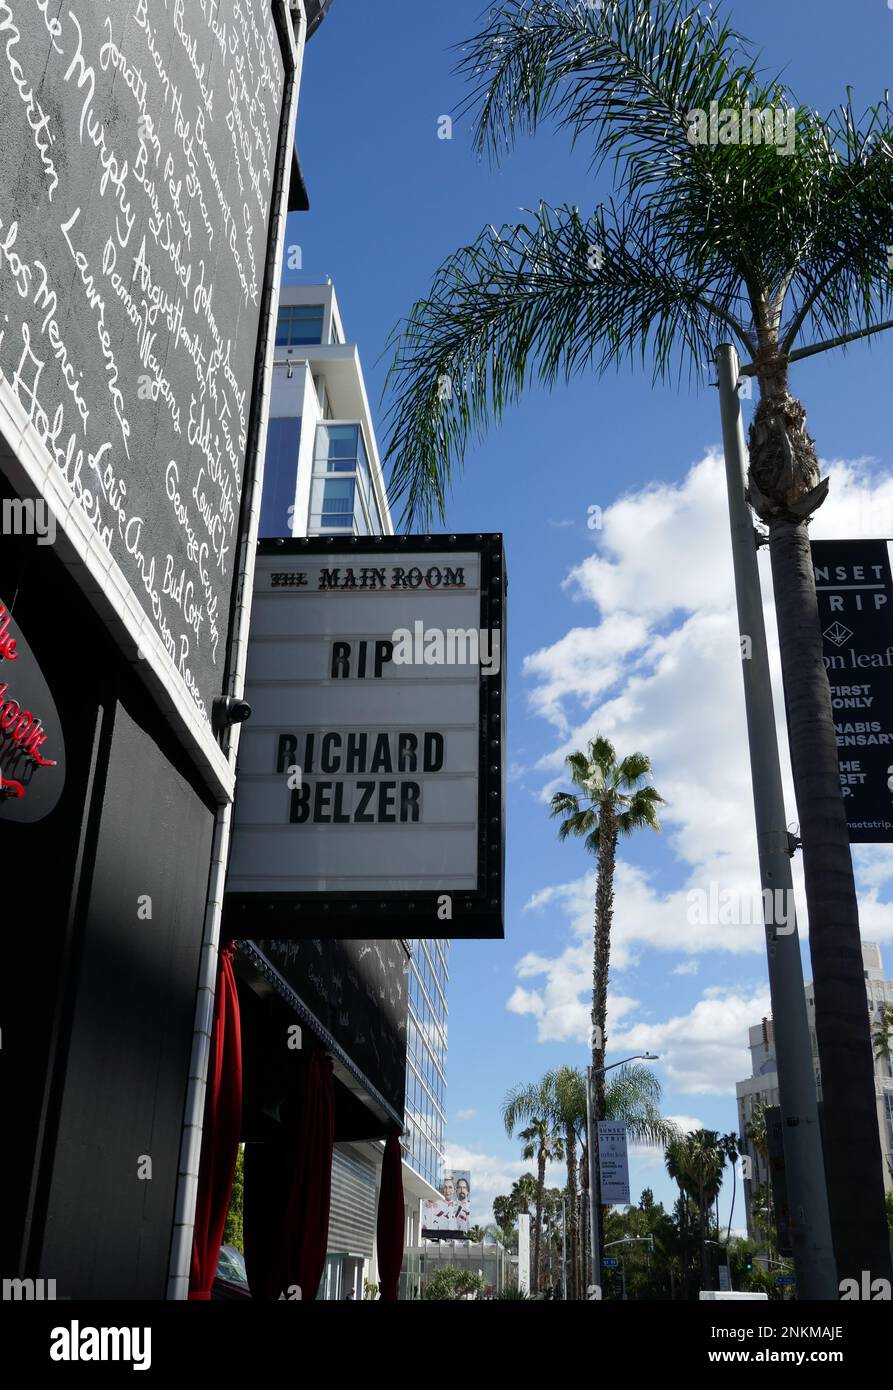 West Hollywood, California, USA 22nd February 2023 RIP Richard Belzer Marquee at The Comedy Store on Sunset Blvd on February 22, 2023 in West Hollywood, California, USA. Photo by Barry King/Alamy Stock Photo Stock Photo